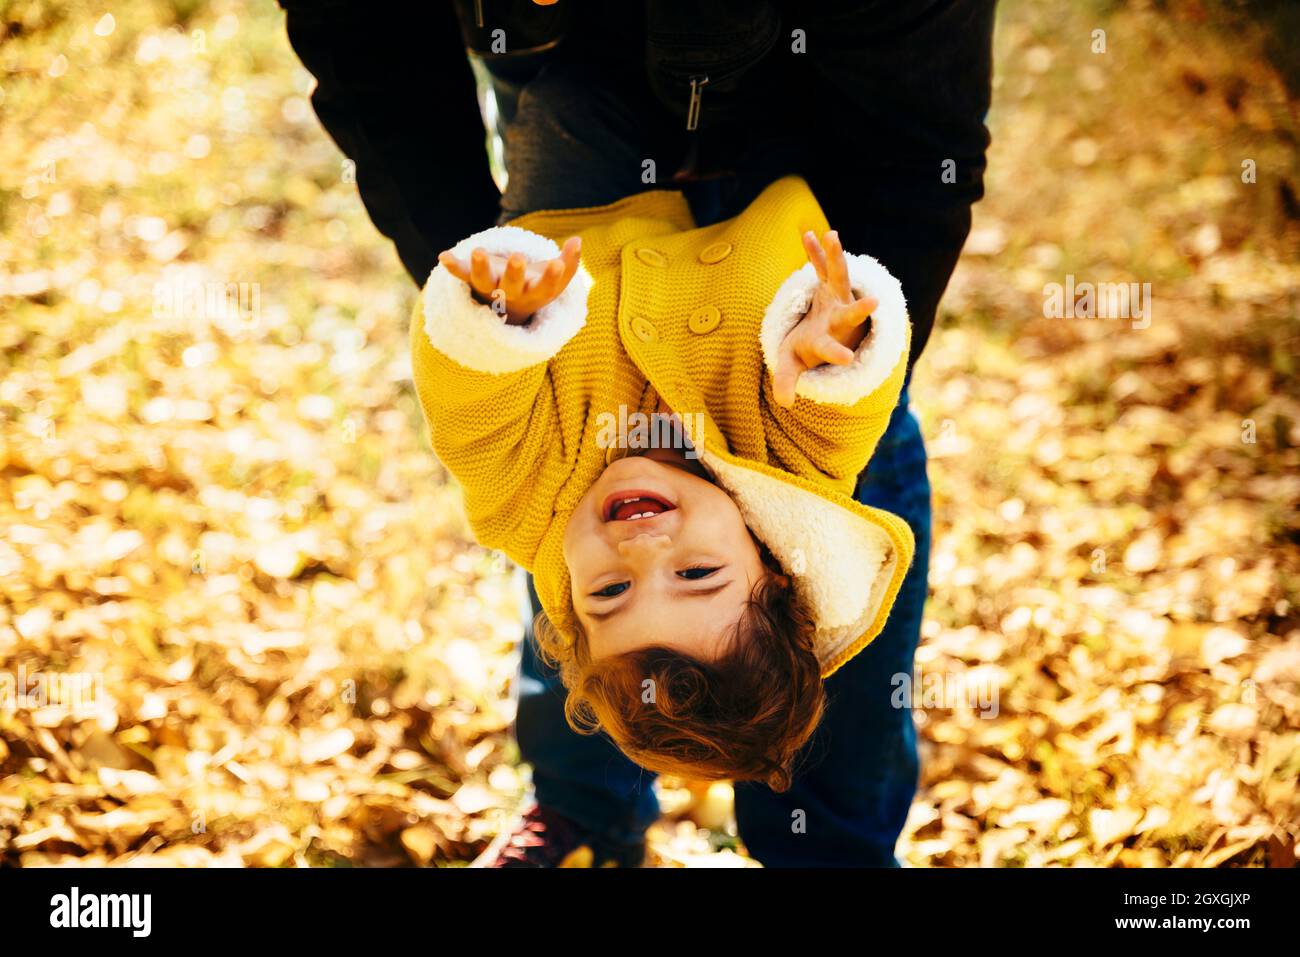 Happy little girl in yellow jacket playing with her father in park. Child smiling and hanging in autumn forest. Family time fun in autumn season. Stock Photo